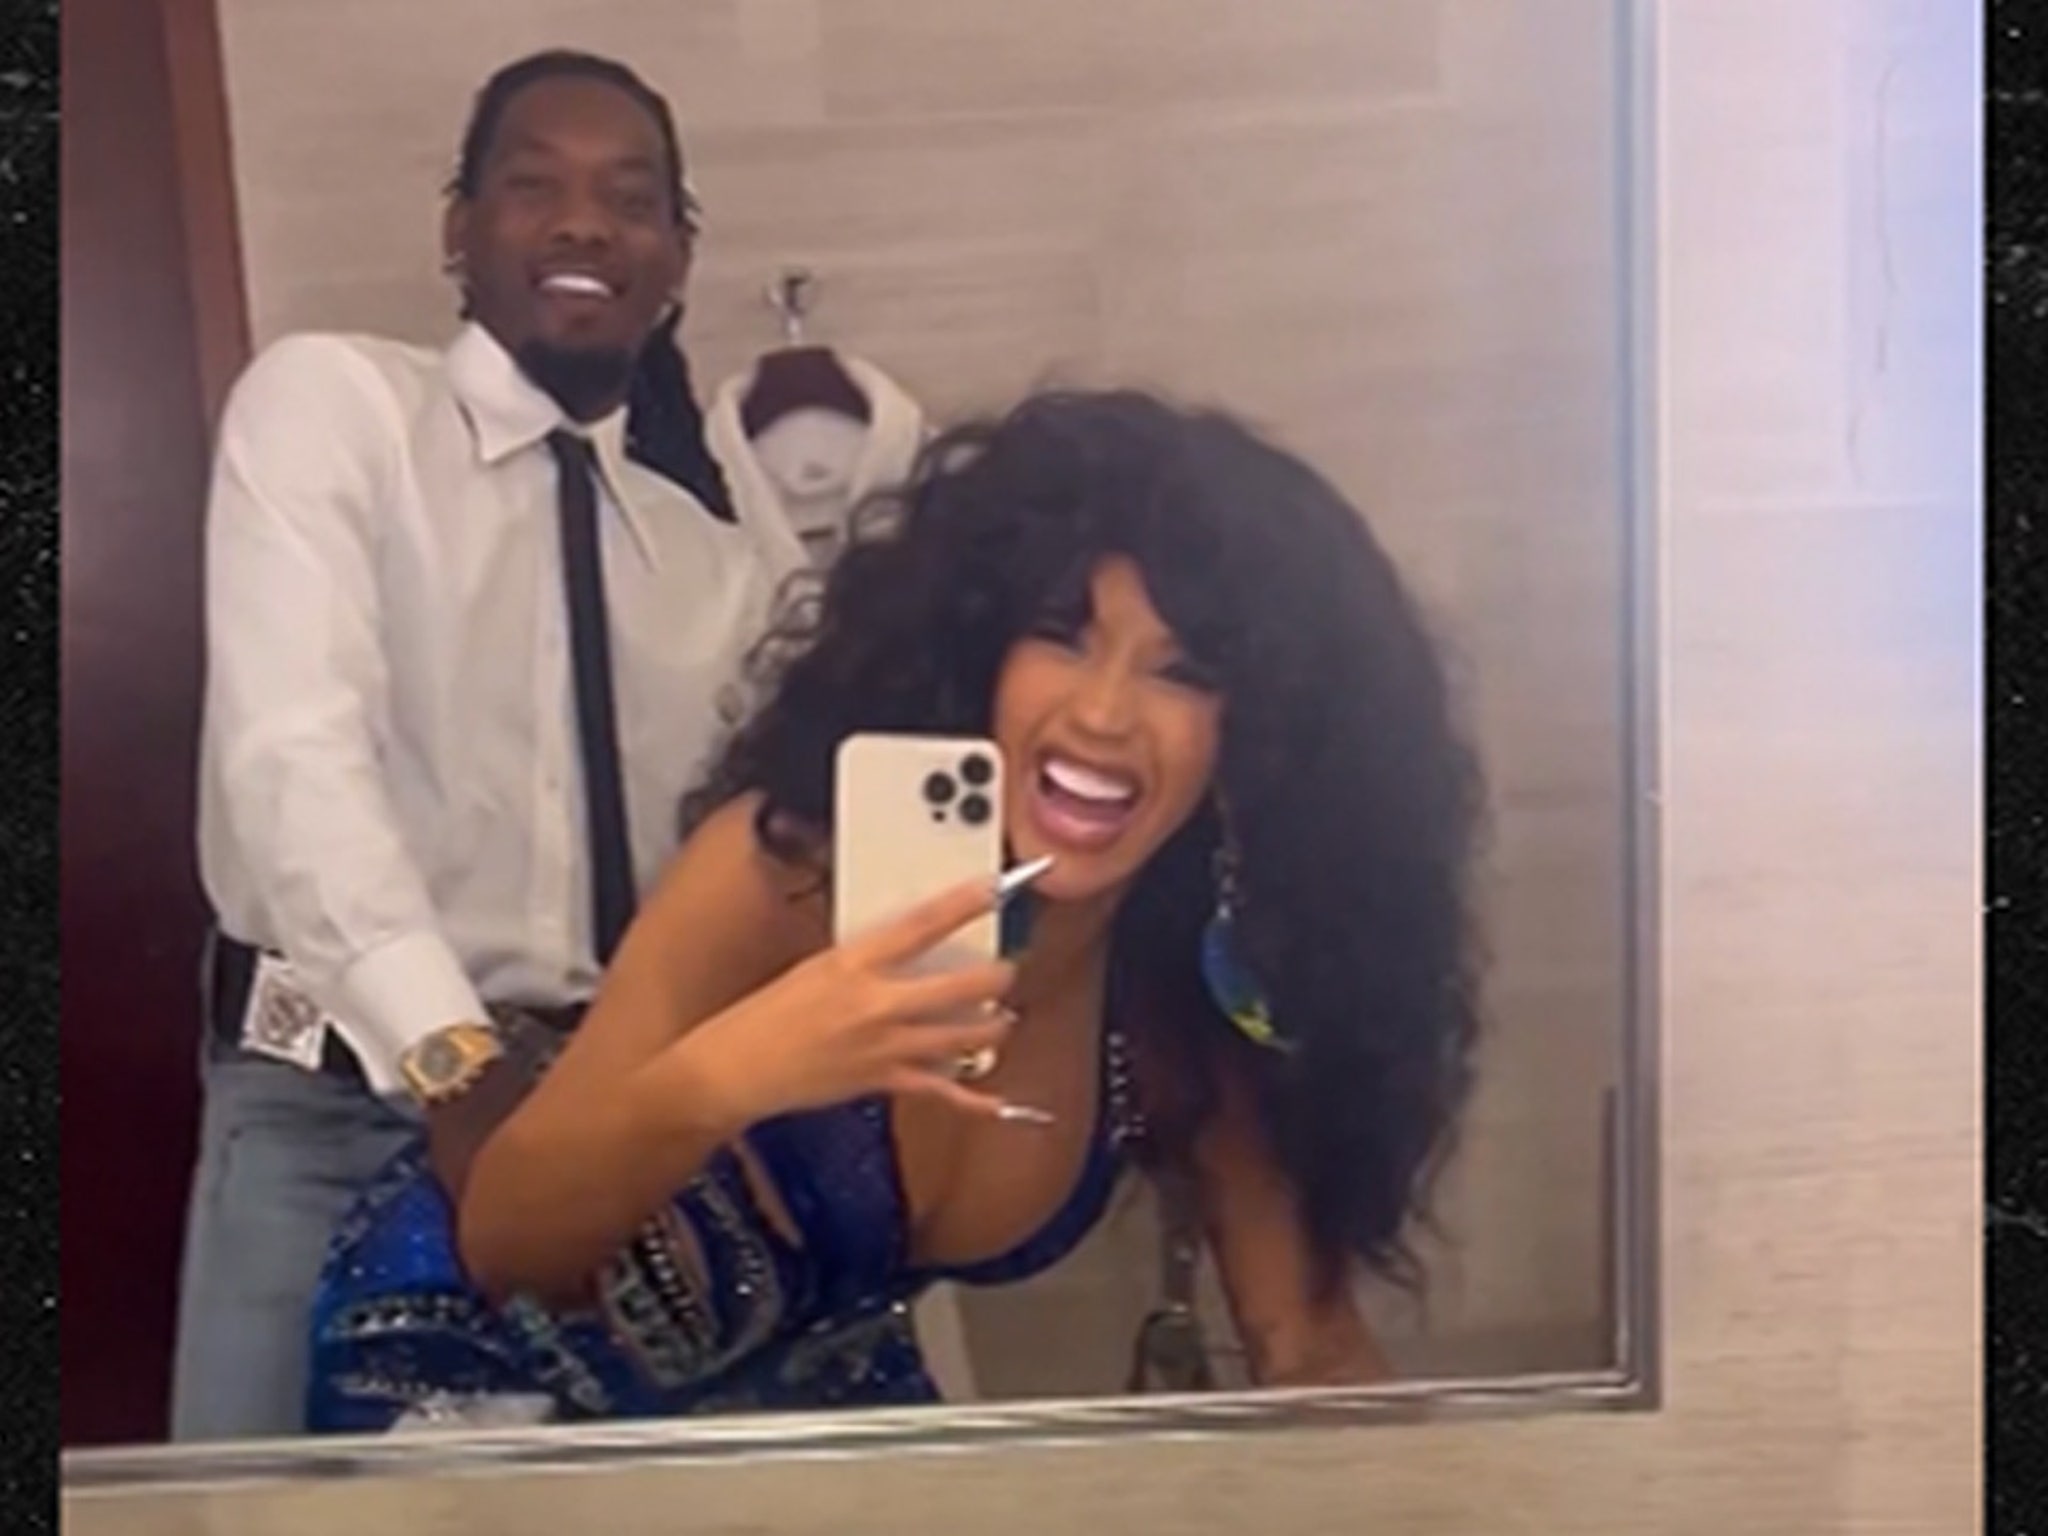 Cardi B, Offset Differ on Date Night Outfits